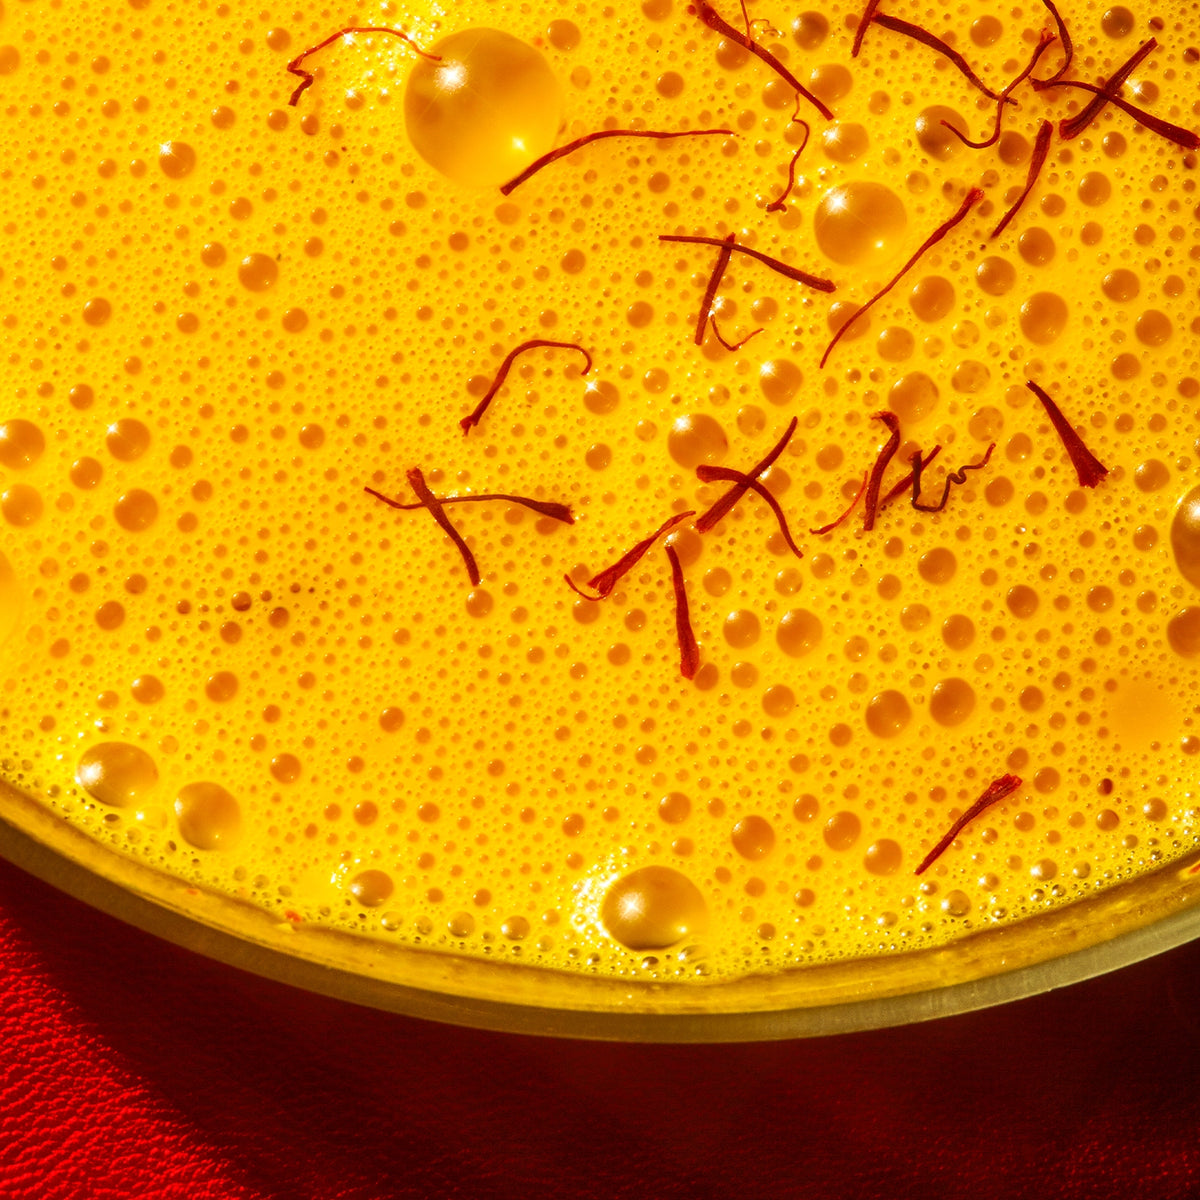 Close-up of saffron warm feelings latte liquid bubbles on a golden surface for mood improvement by THE FULLEST.